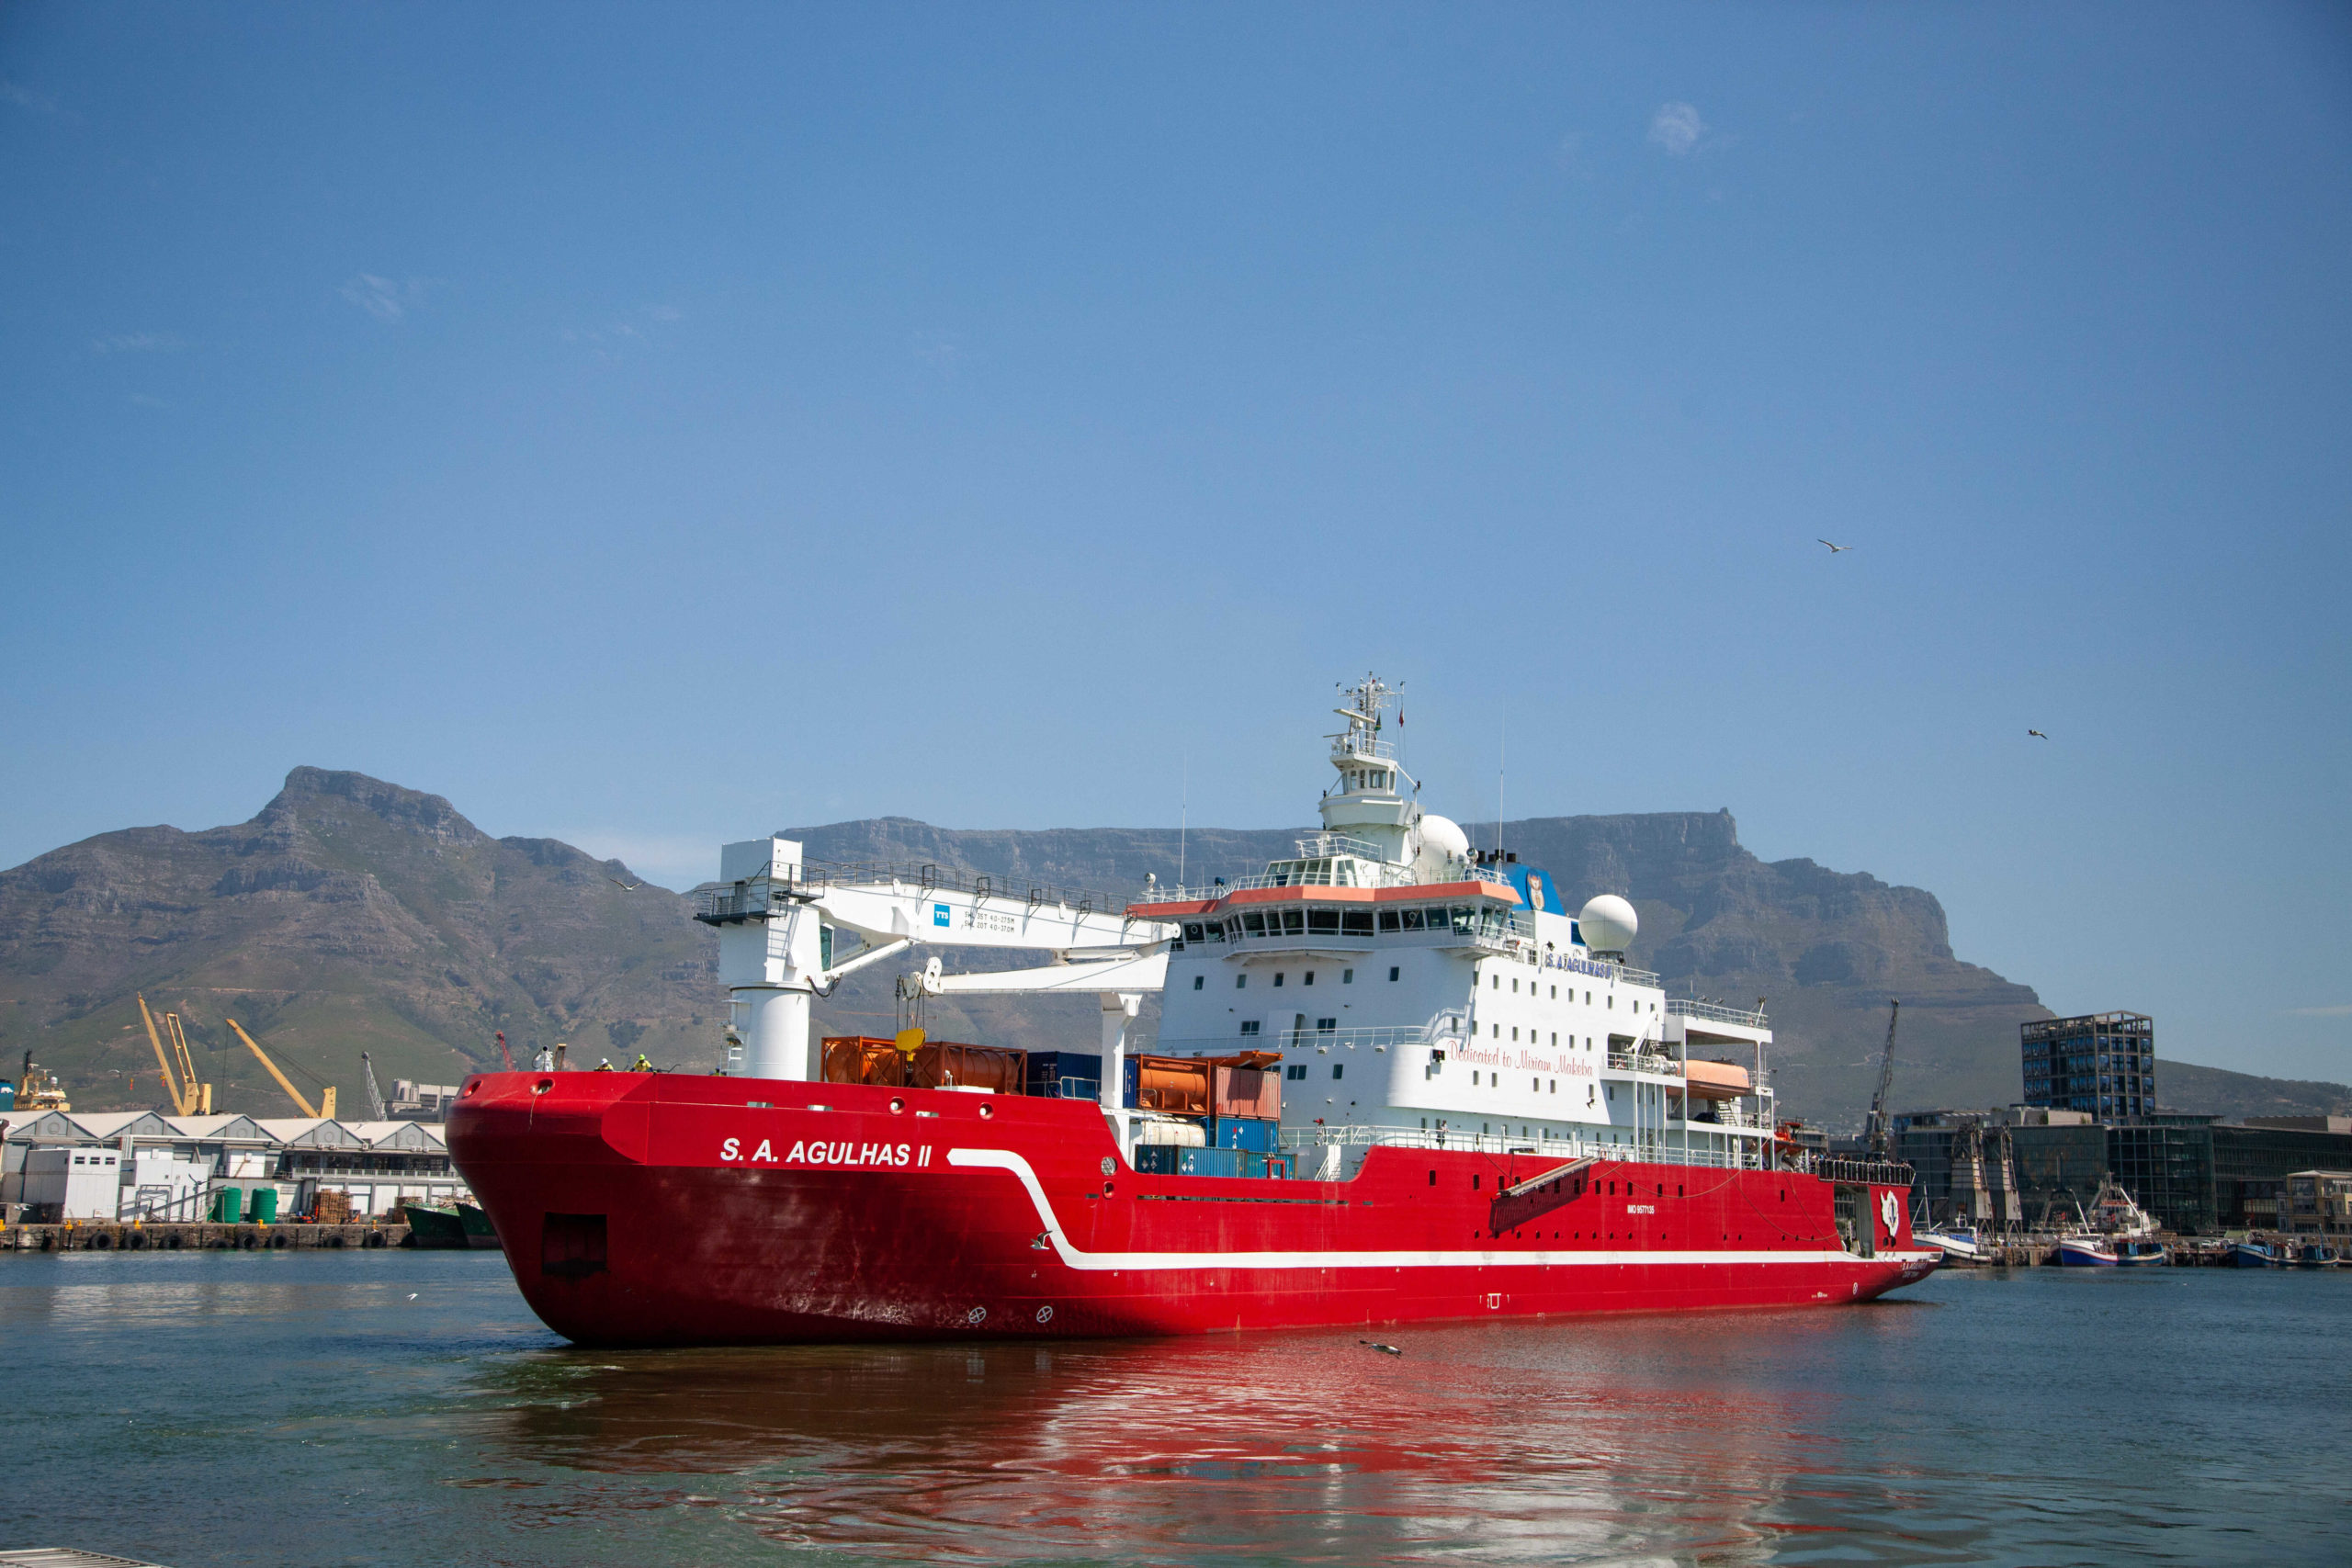 The S.A. Agulhas II in its home port in Cape Town. South Africa©Amsol.